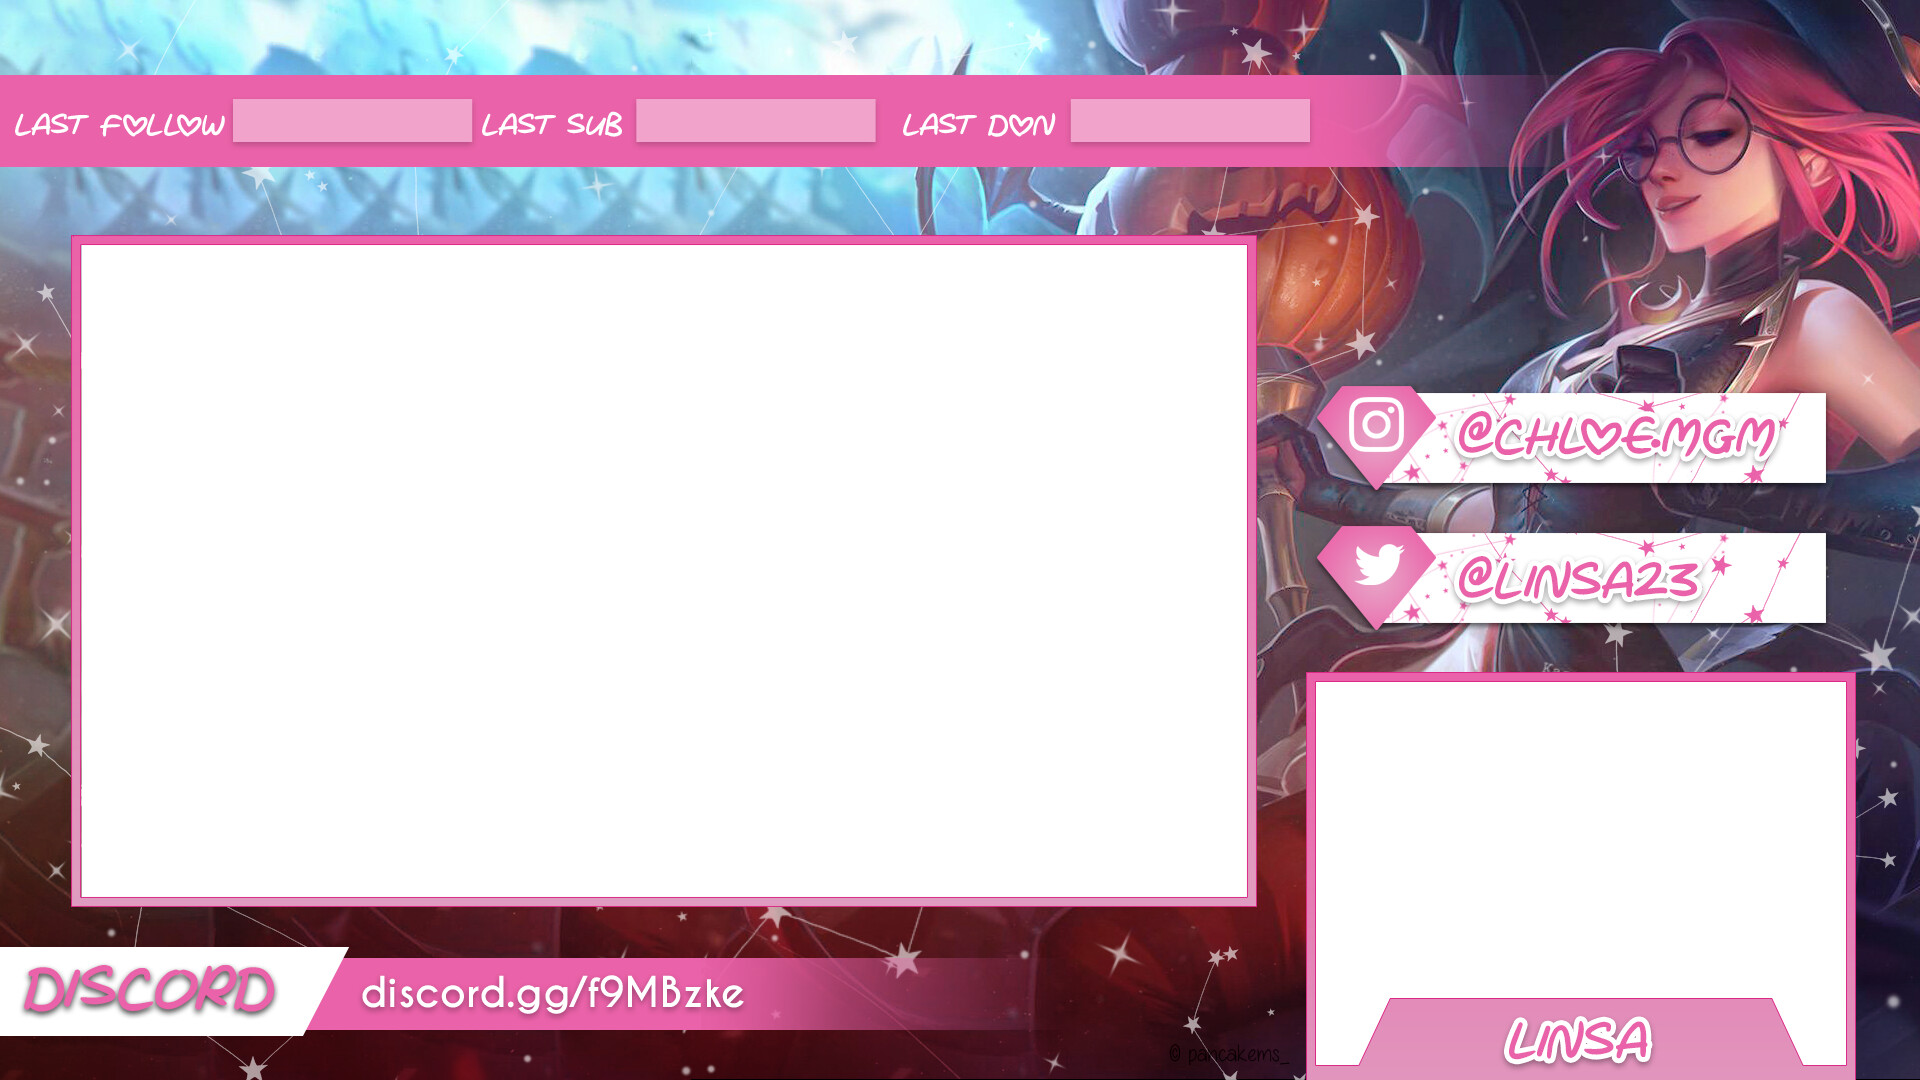 Twitch League of Legends Overlay - JUST CHATTING 2 by Alenarya on